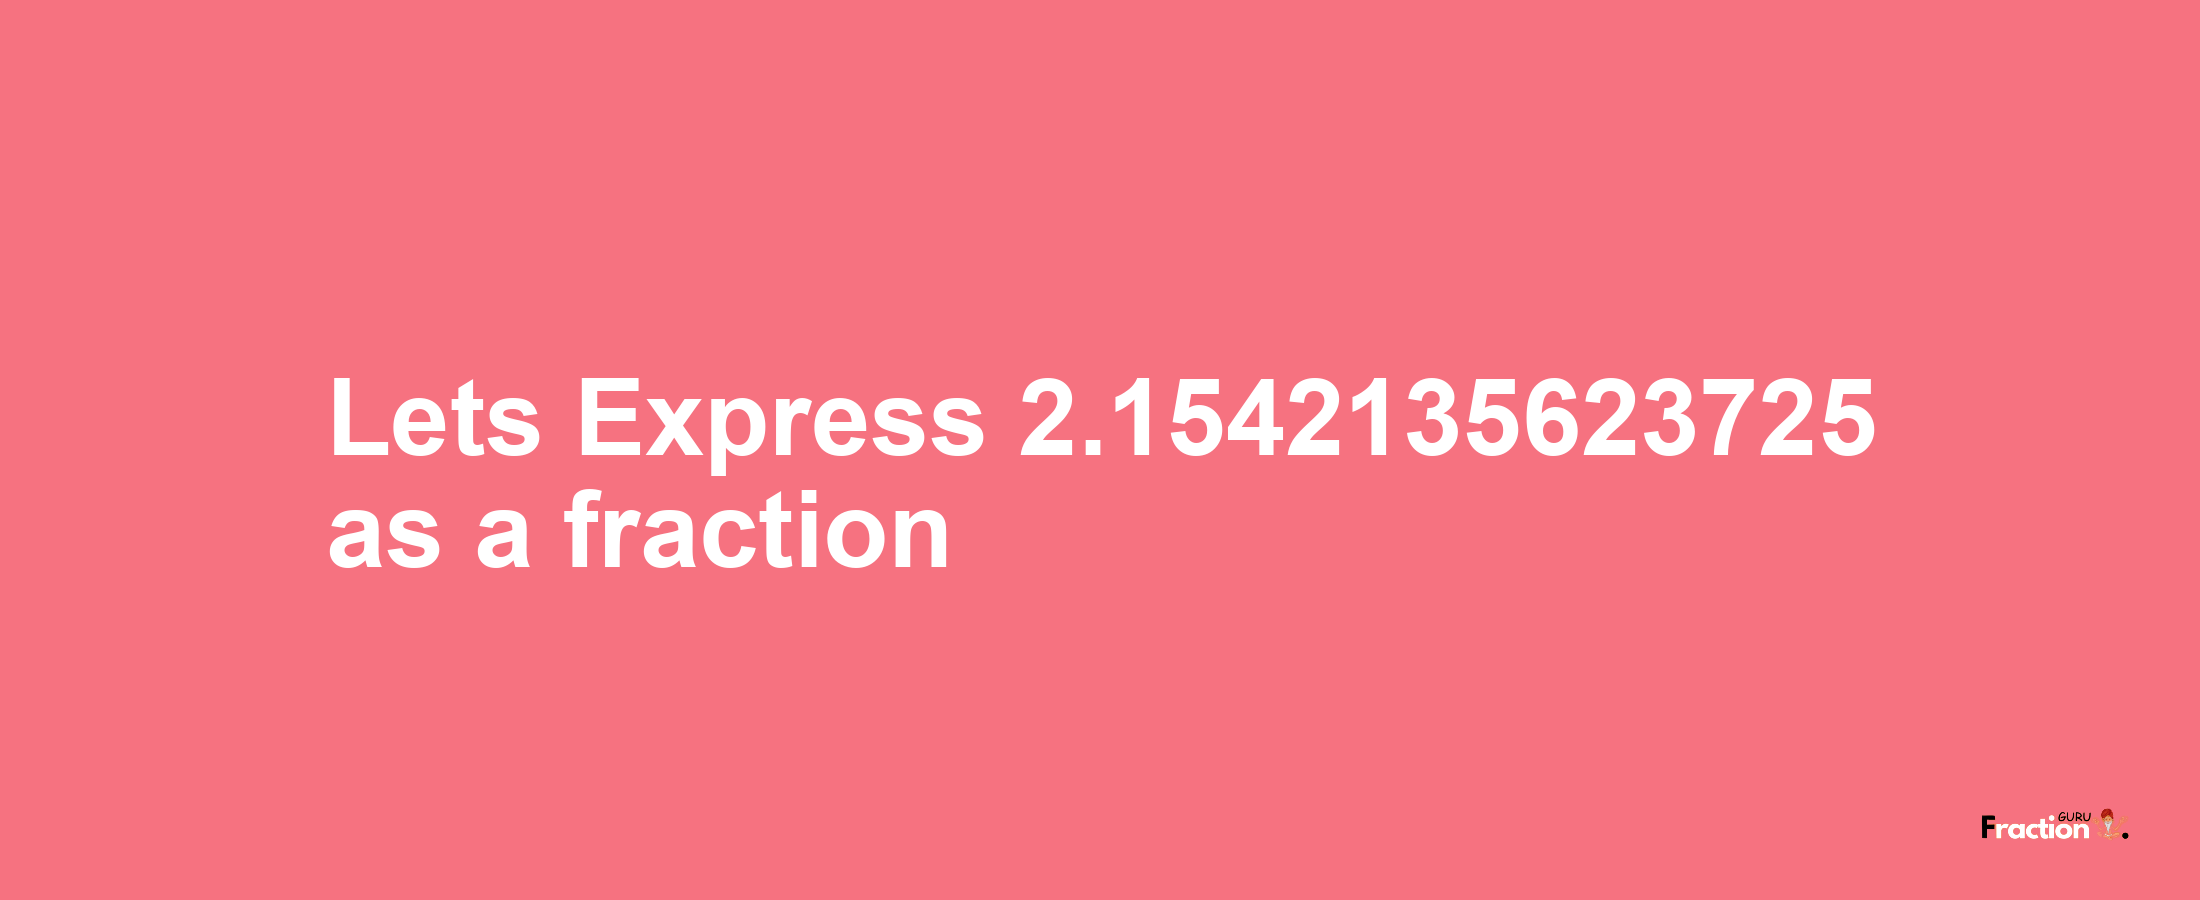 Lets Express 2.1542135623725 as afraction